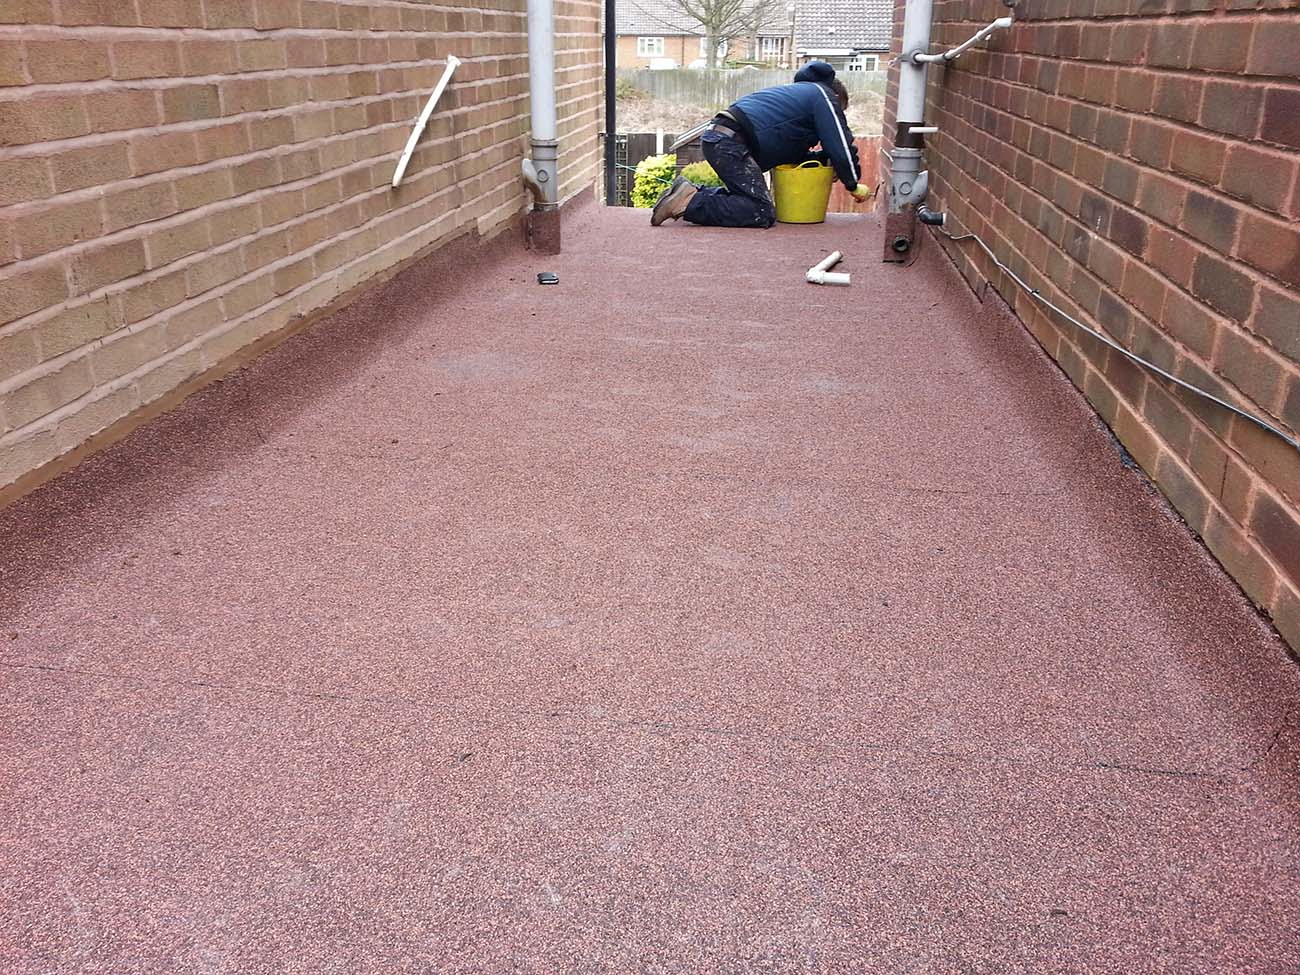 Flat roof installations in Walsall, Aldridge and West Midlands